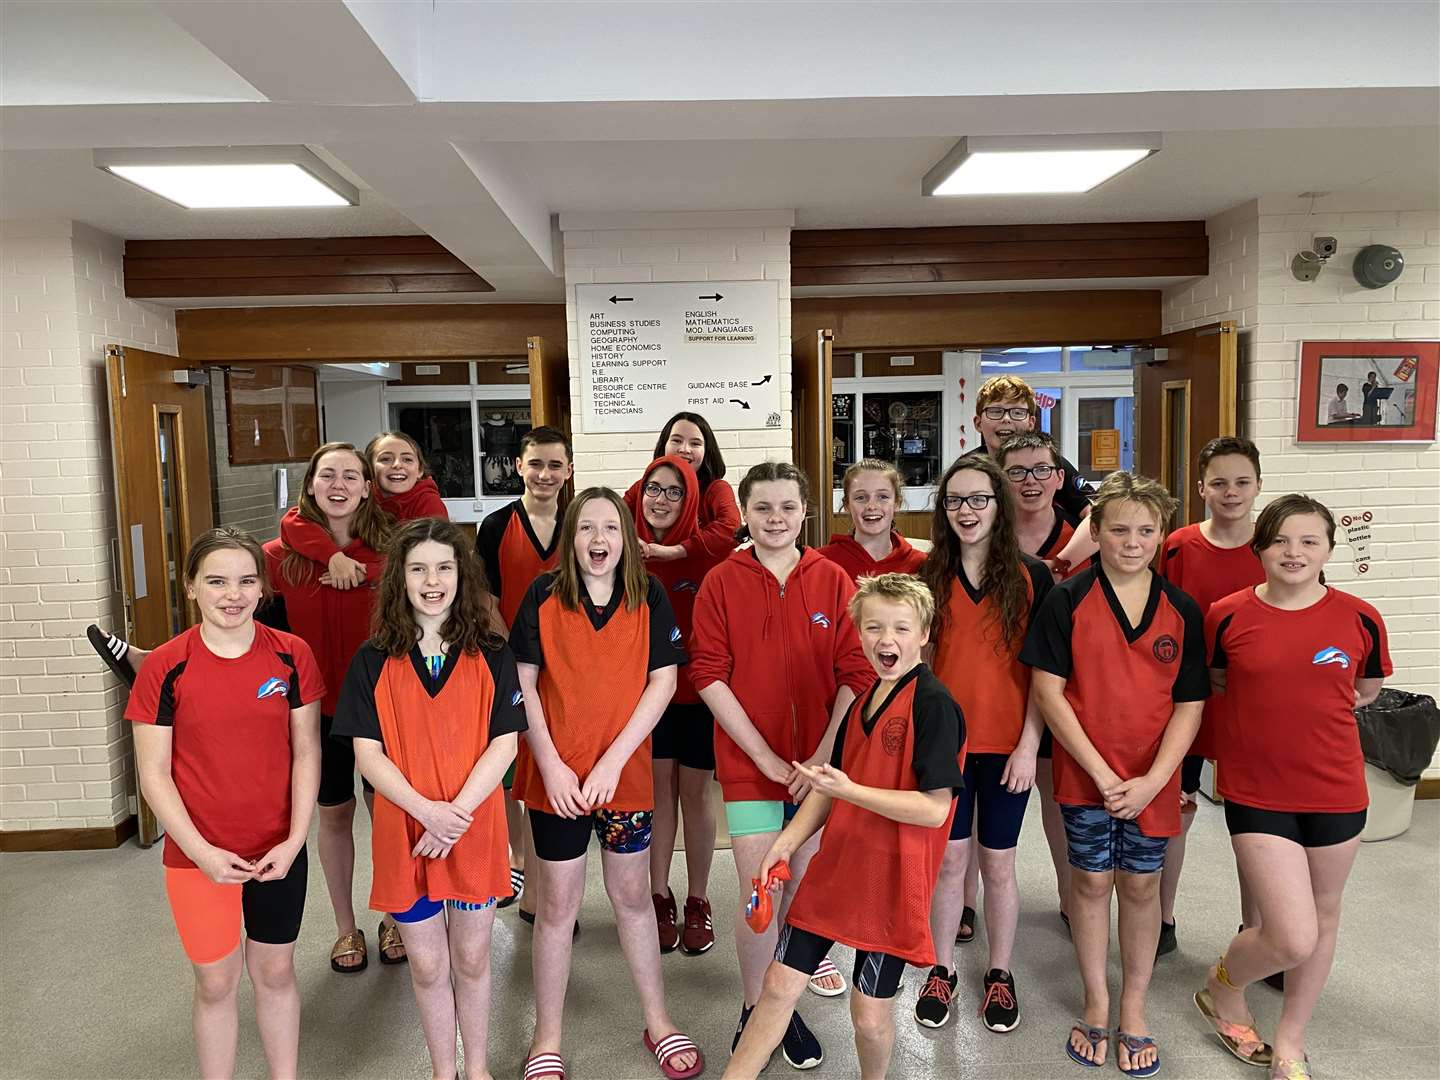 The team from Thurso Amateur Swimming Club who had a successful visit to Buckie.